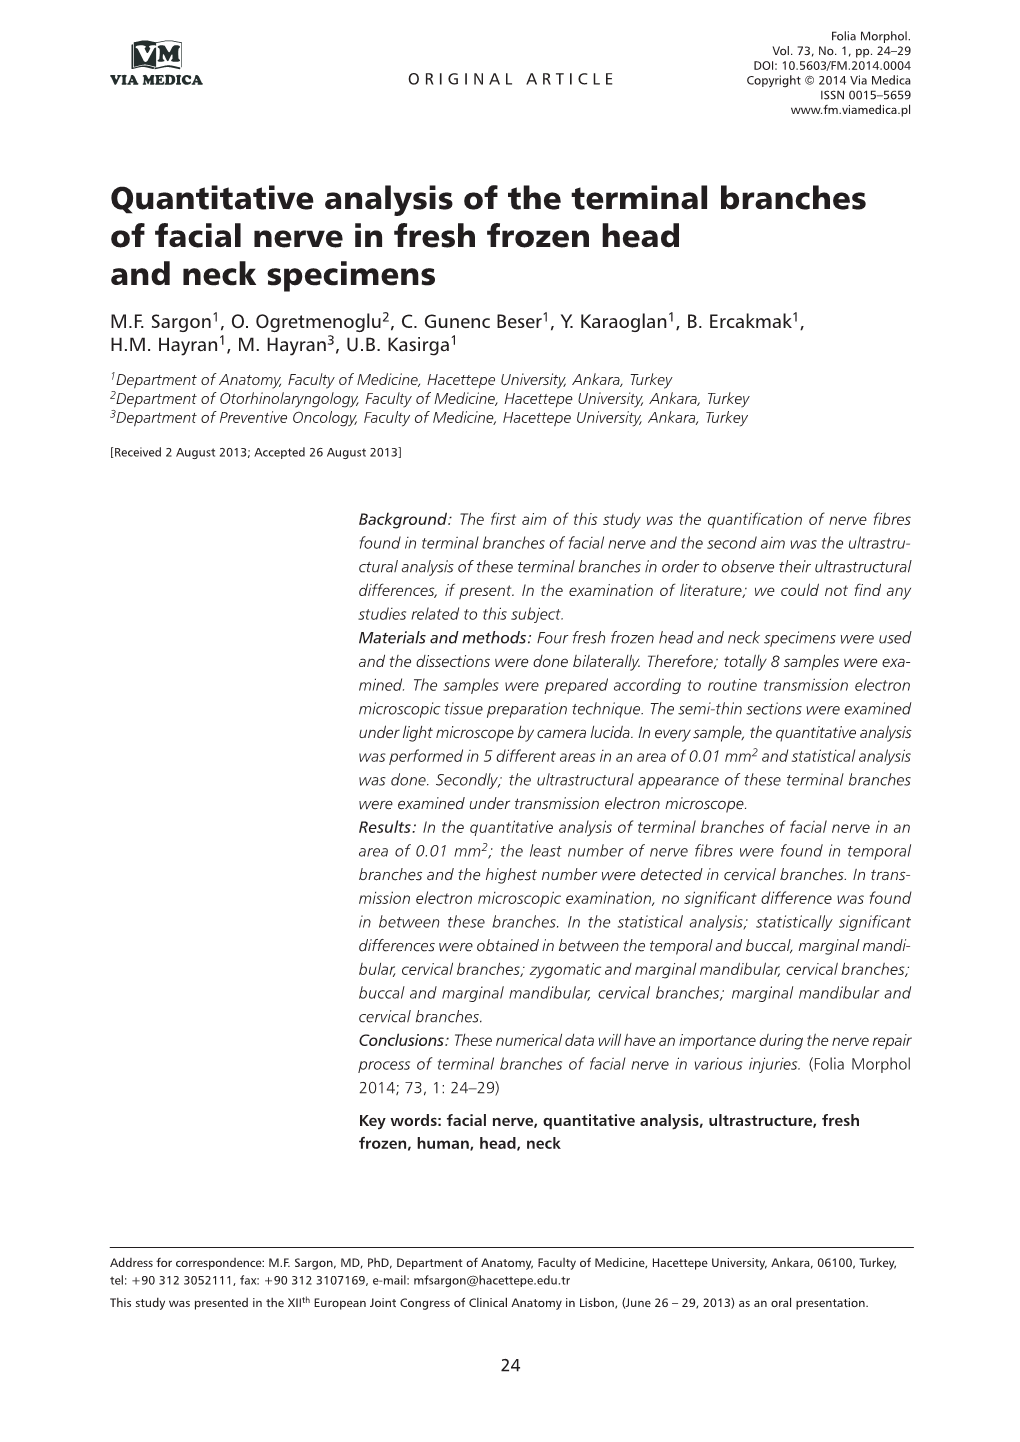 Quantitative Analysis of the Terminal Branches of Facial Nerve in Fresh Frozen Head and Neck Specimens M.F